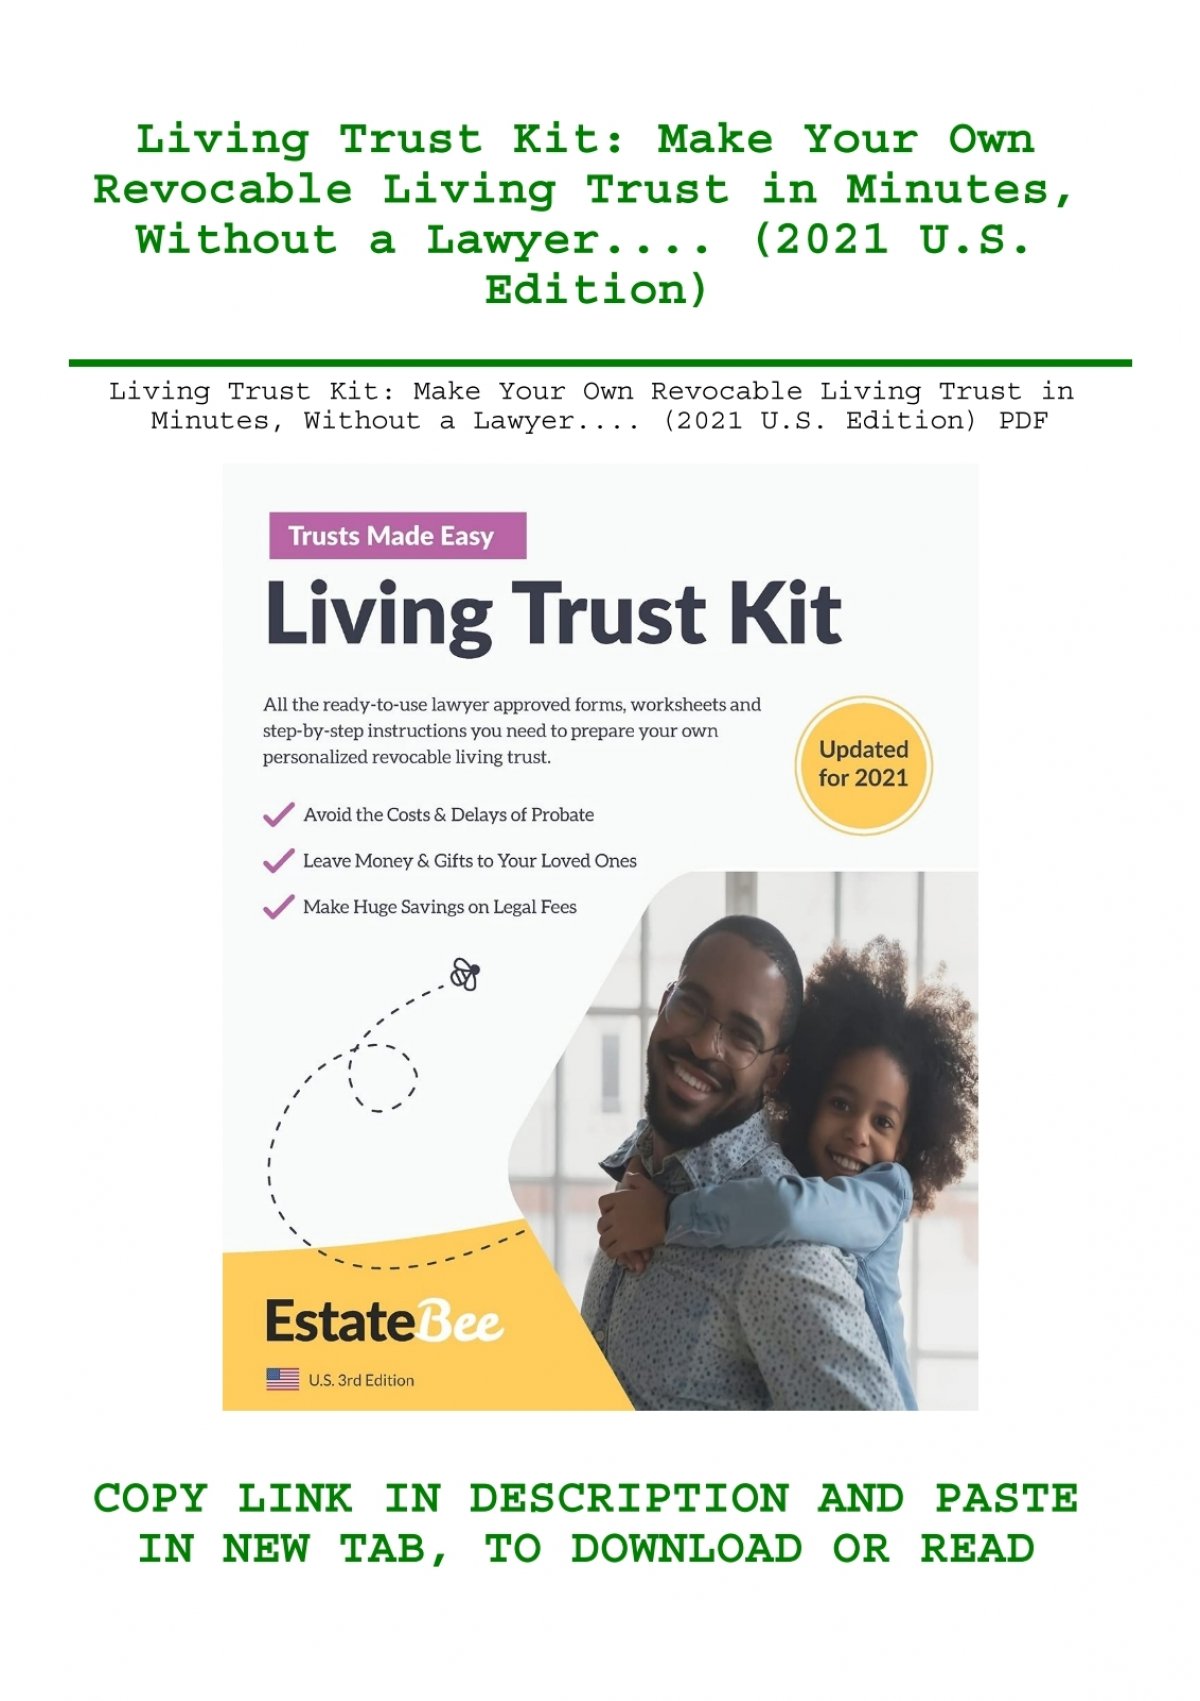 living-trust-kit-make-your-own-revocable-living-trust-in-minutes